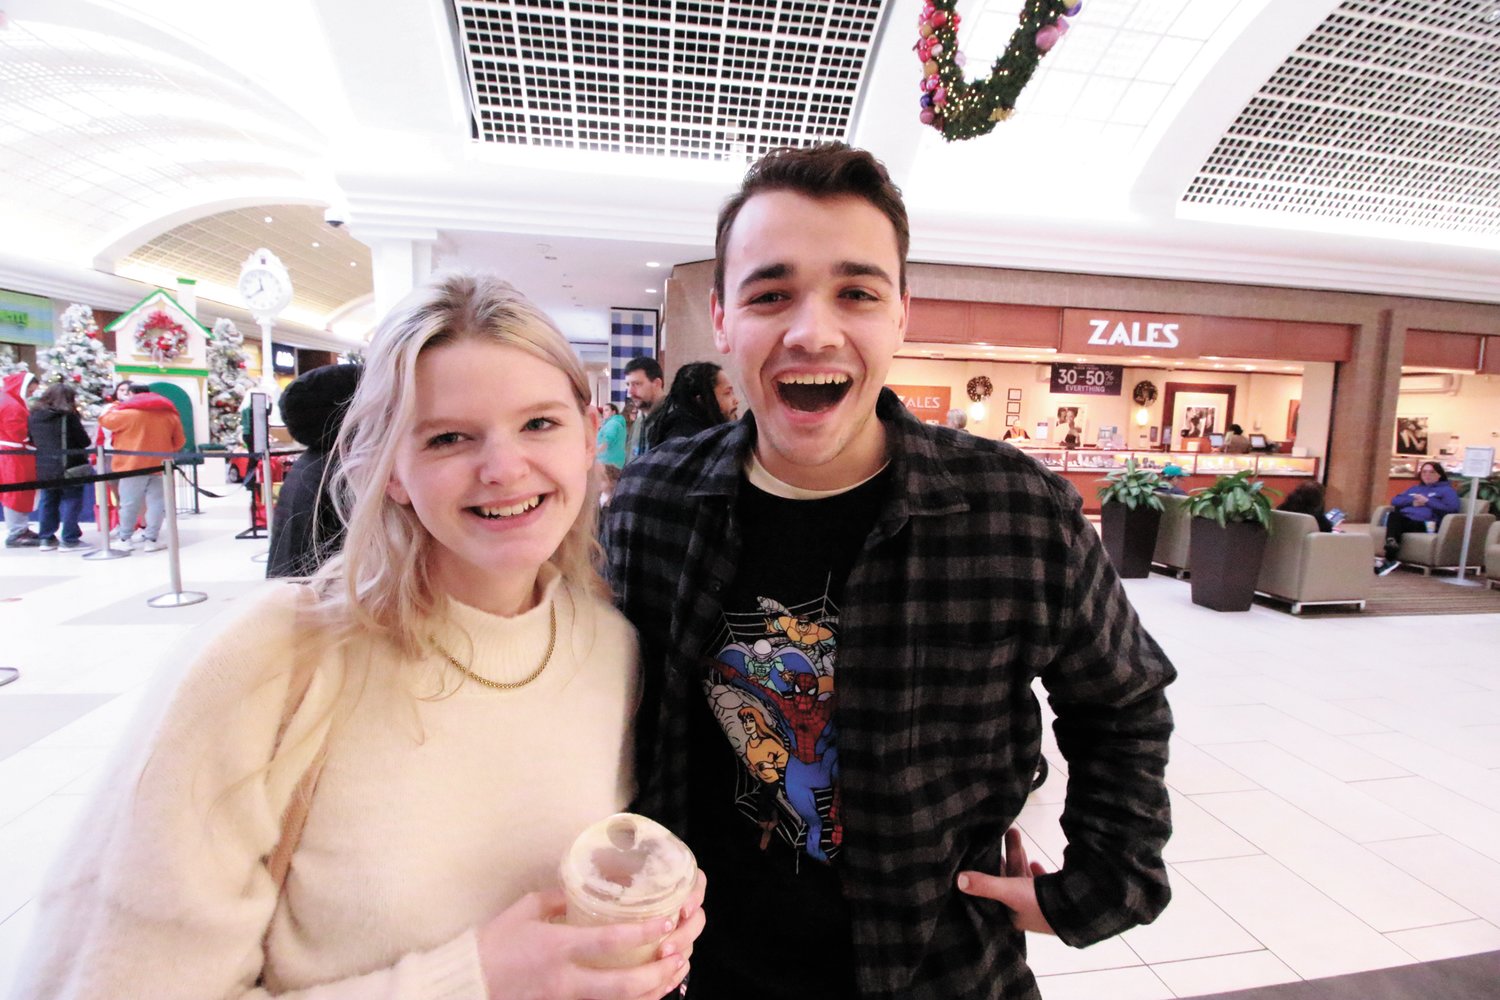 HUNTING FOR A RING: Warwick Mall was the first stop for Joe Rocco and Farah Kinsella as they looked for the perfect engagement ring on Black Friday. (Warwick Beacon photos)